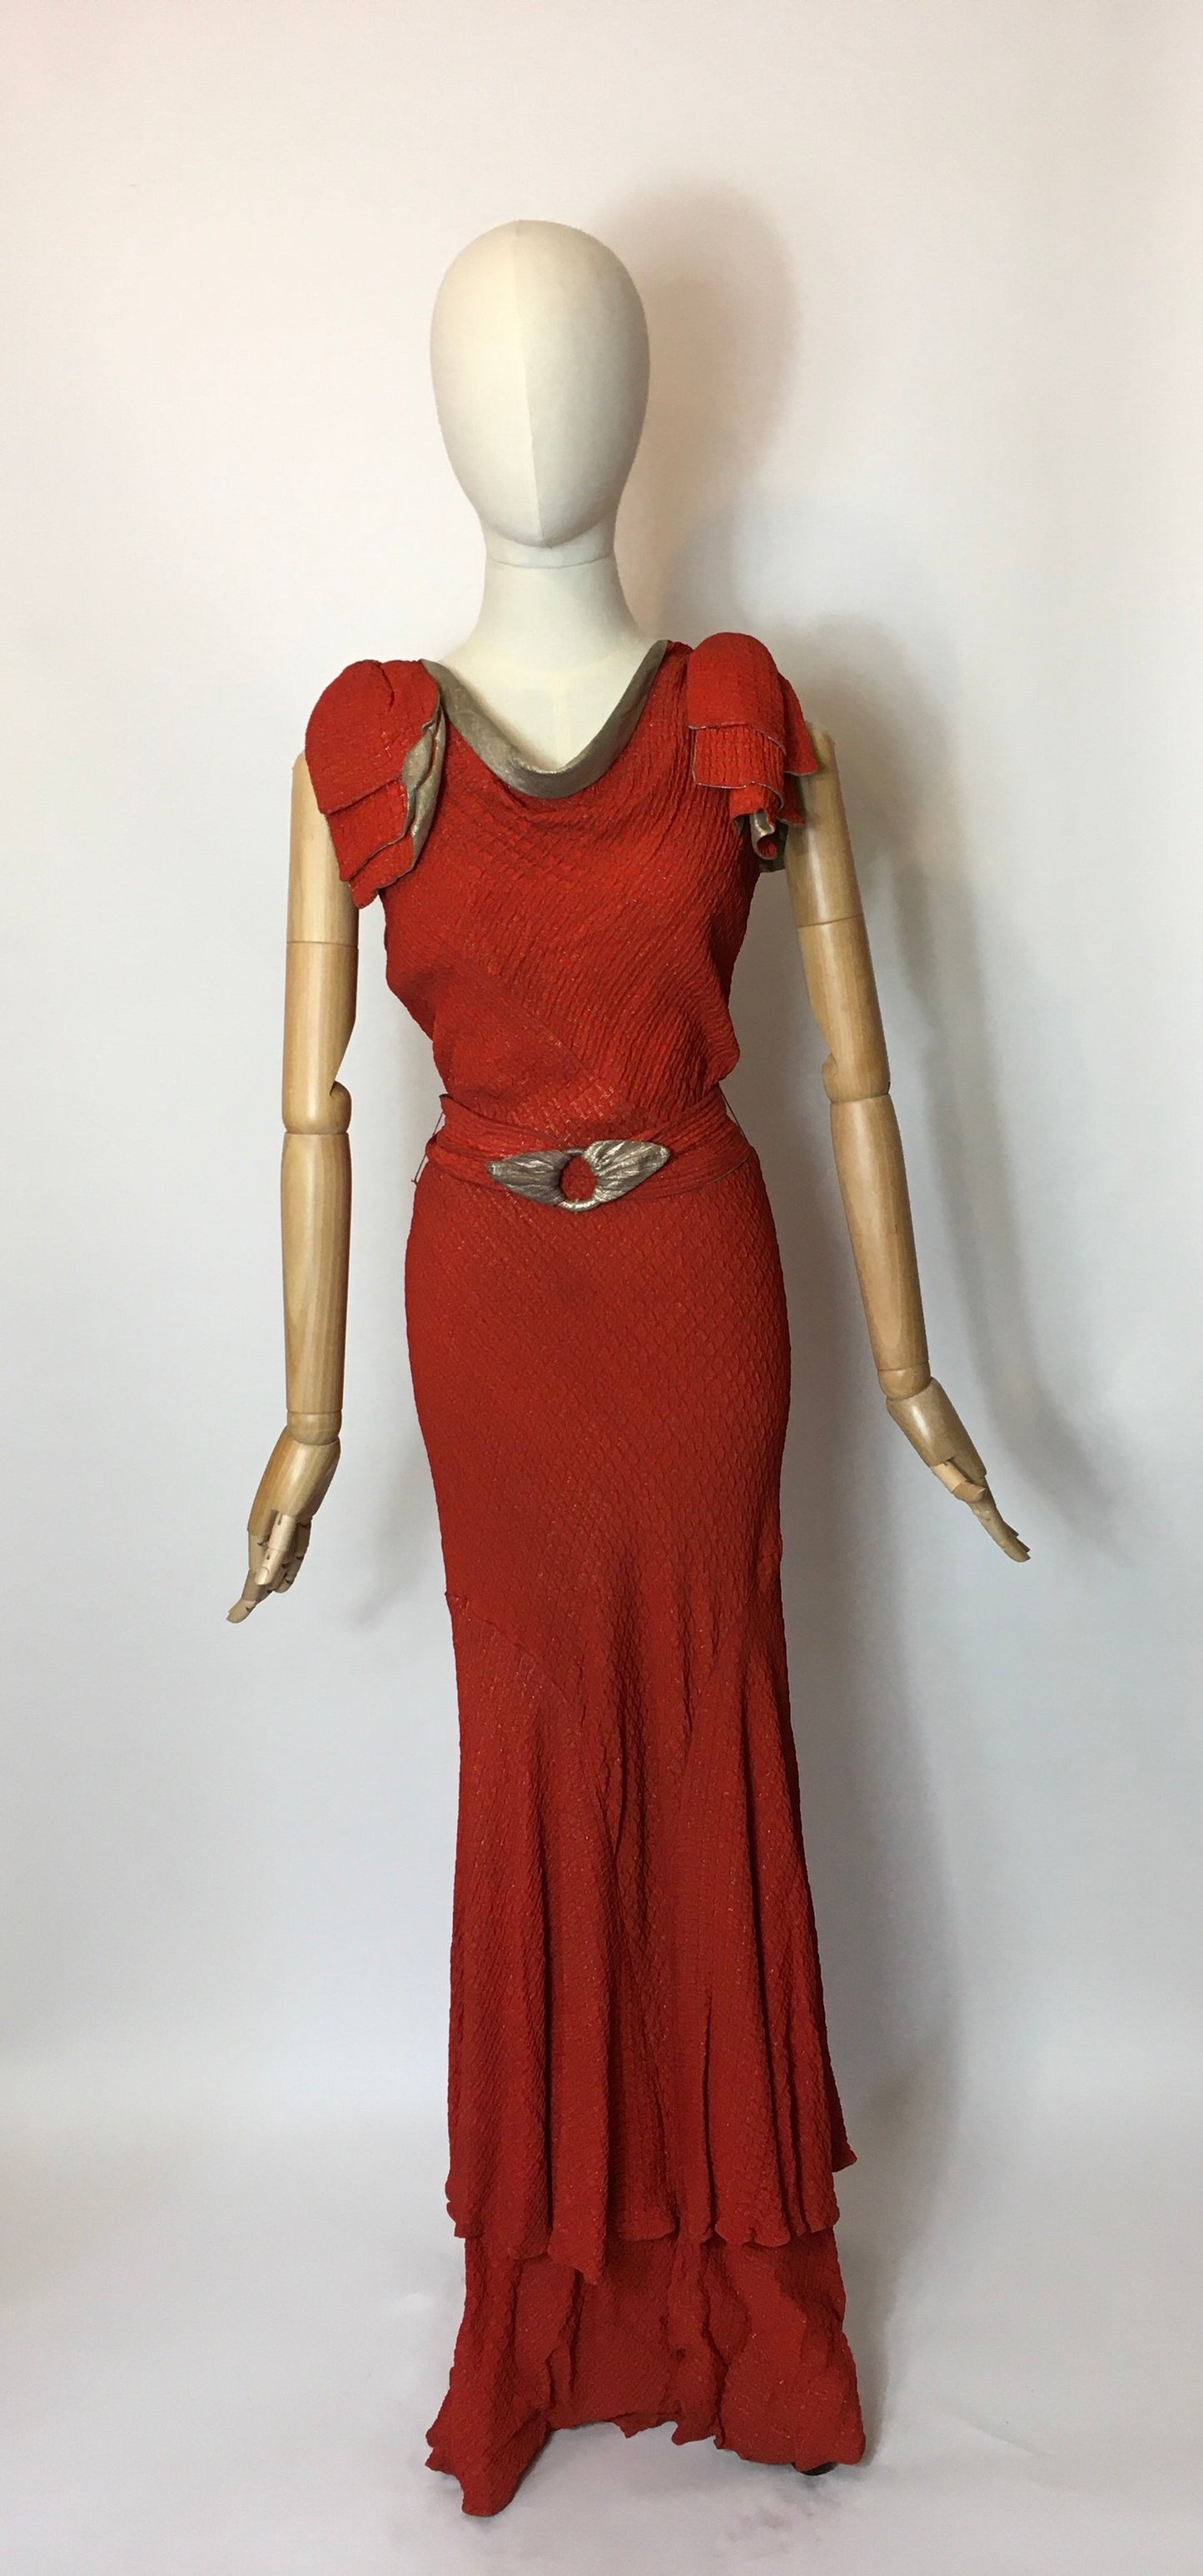 Original 1930’s Stunning Rust and Lame Bias Cut Gown - Festival of Vintage Fashion Show Exclusive